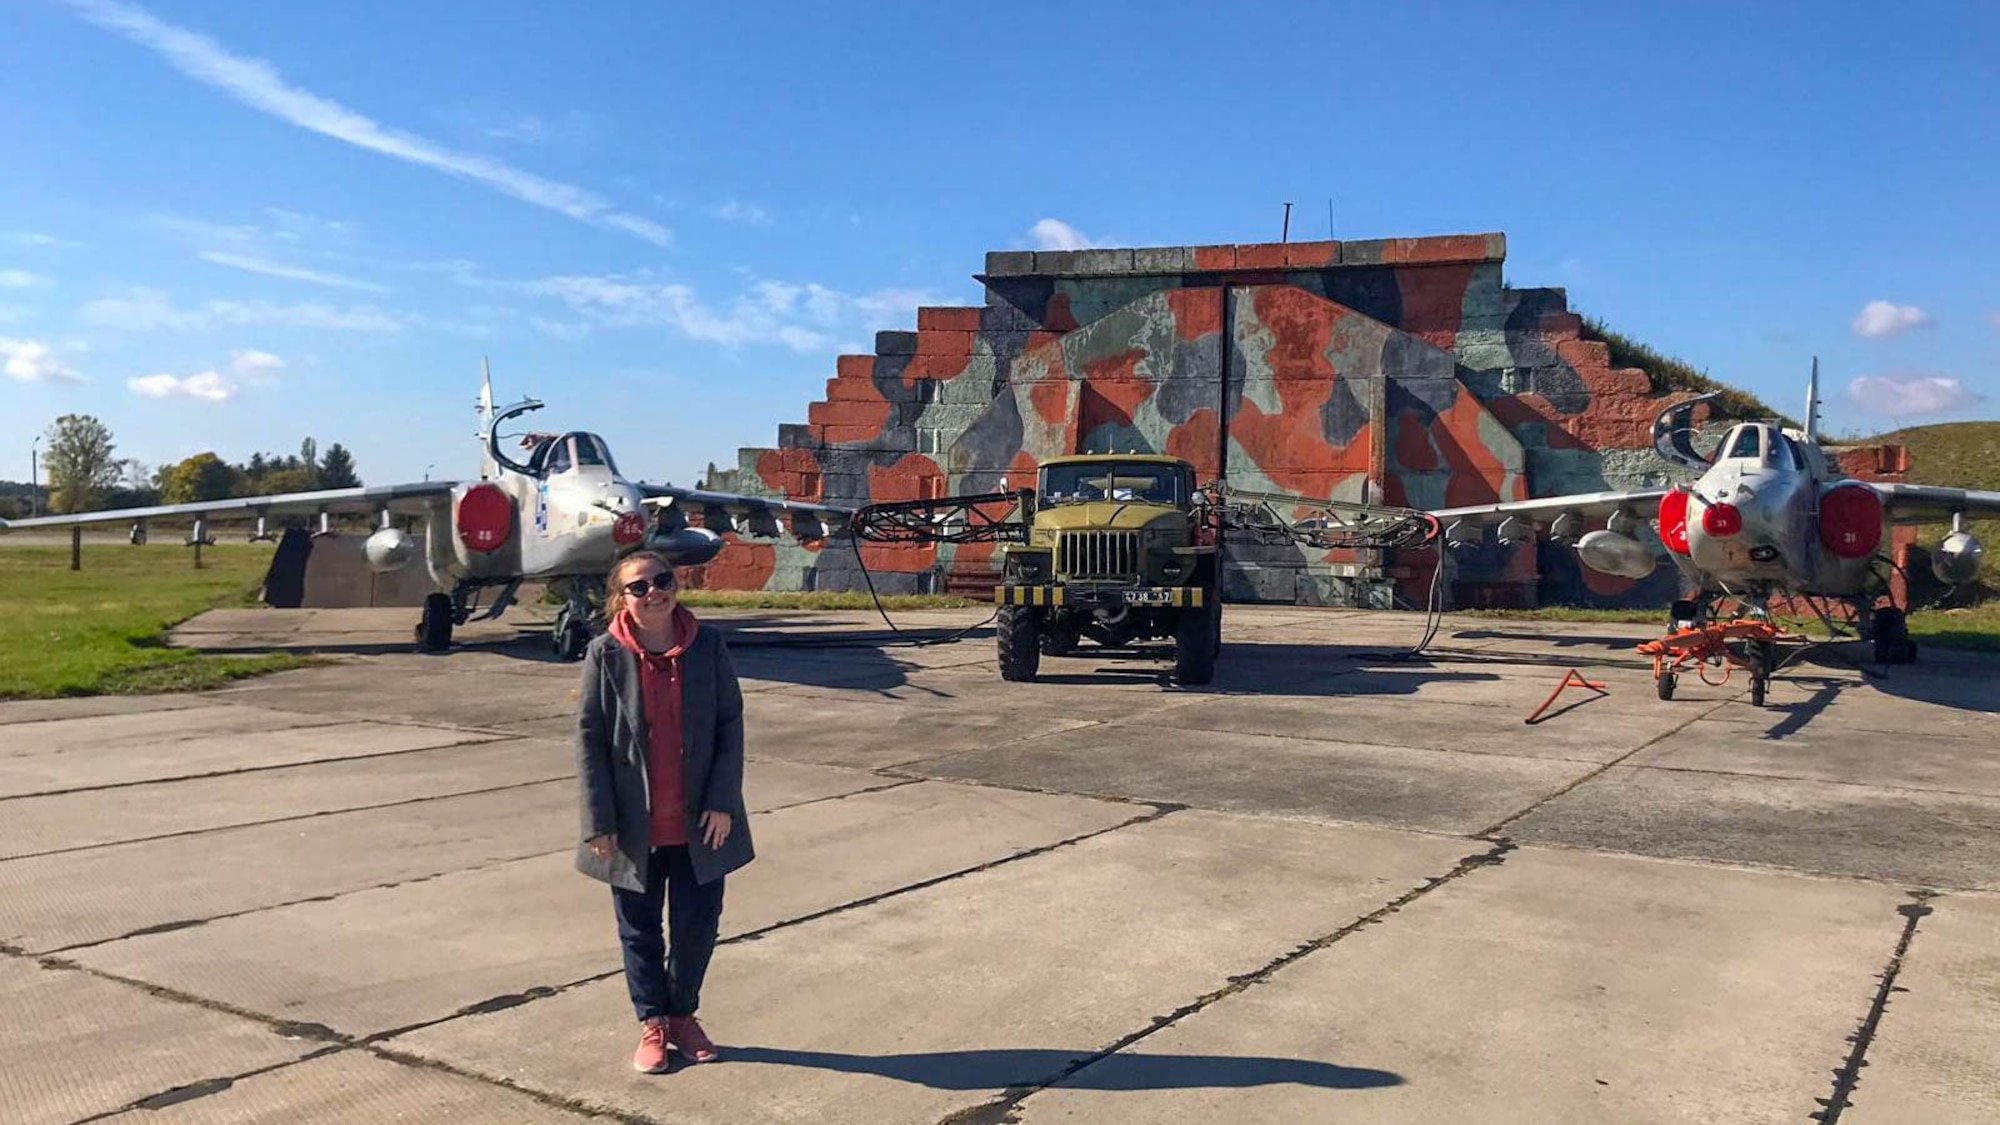 U.S. Air Force Master Sgt. Maria Jarr, 607th Air Control Squadron flight chief, stands in front of a display containing two Ukrainian Sukhoi Su-25 Grach aircraft, October, 2018, at Starokostiantyniv Air Base, Ukraine.